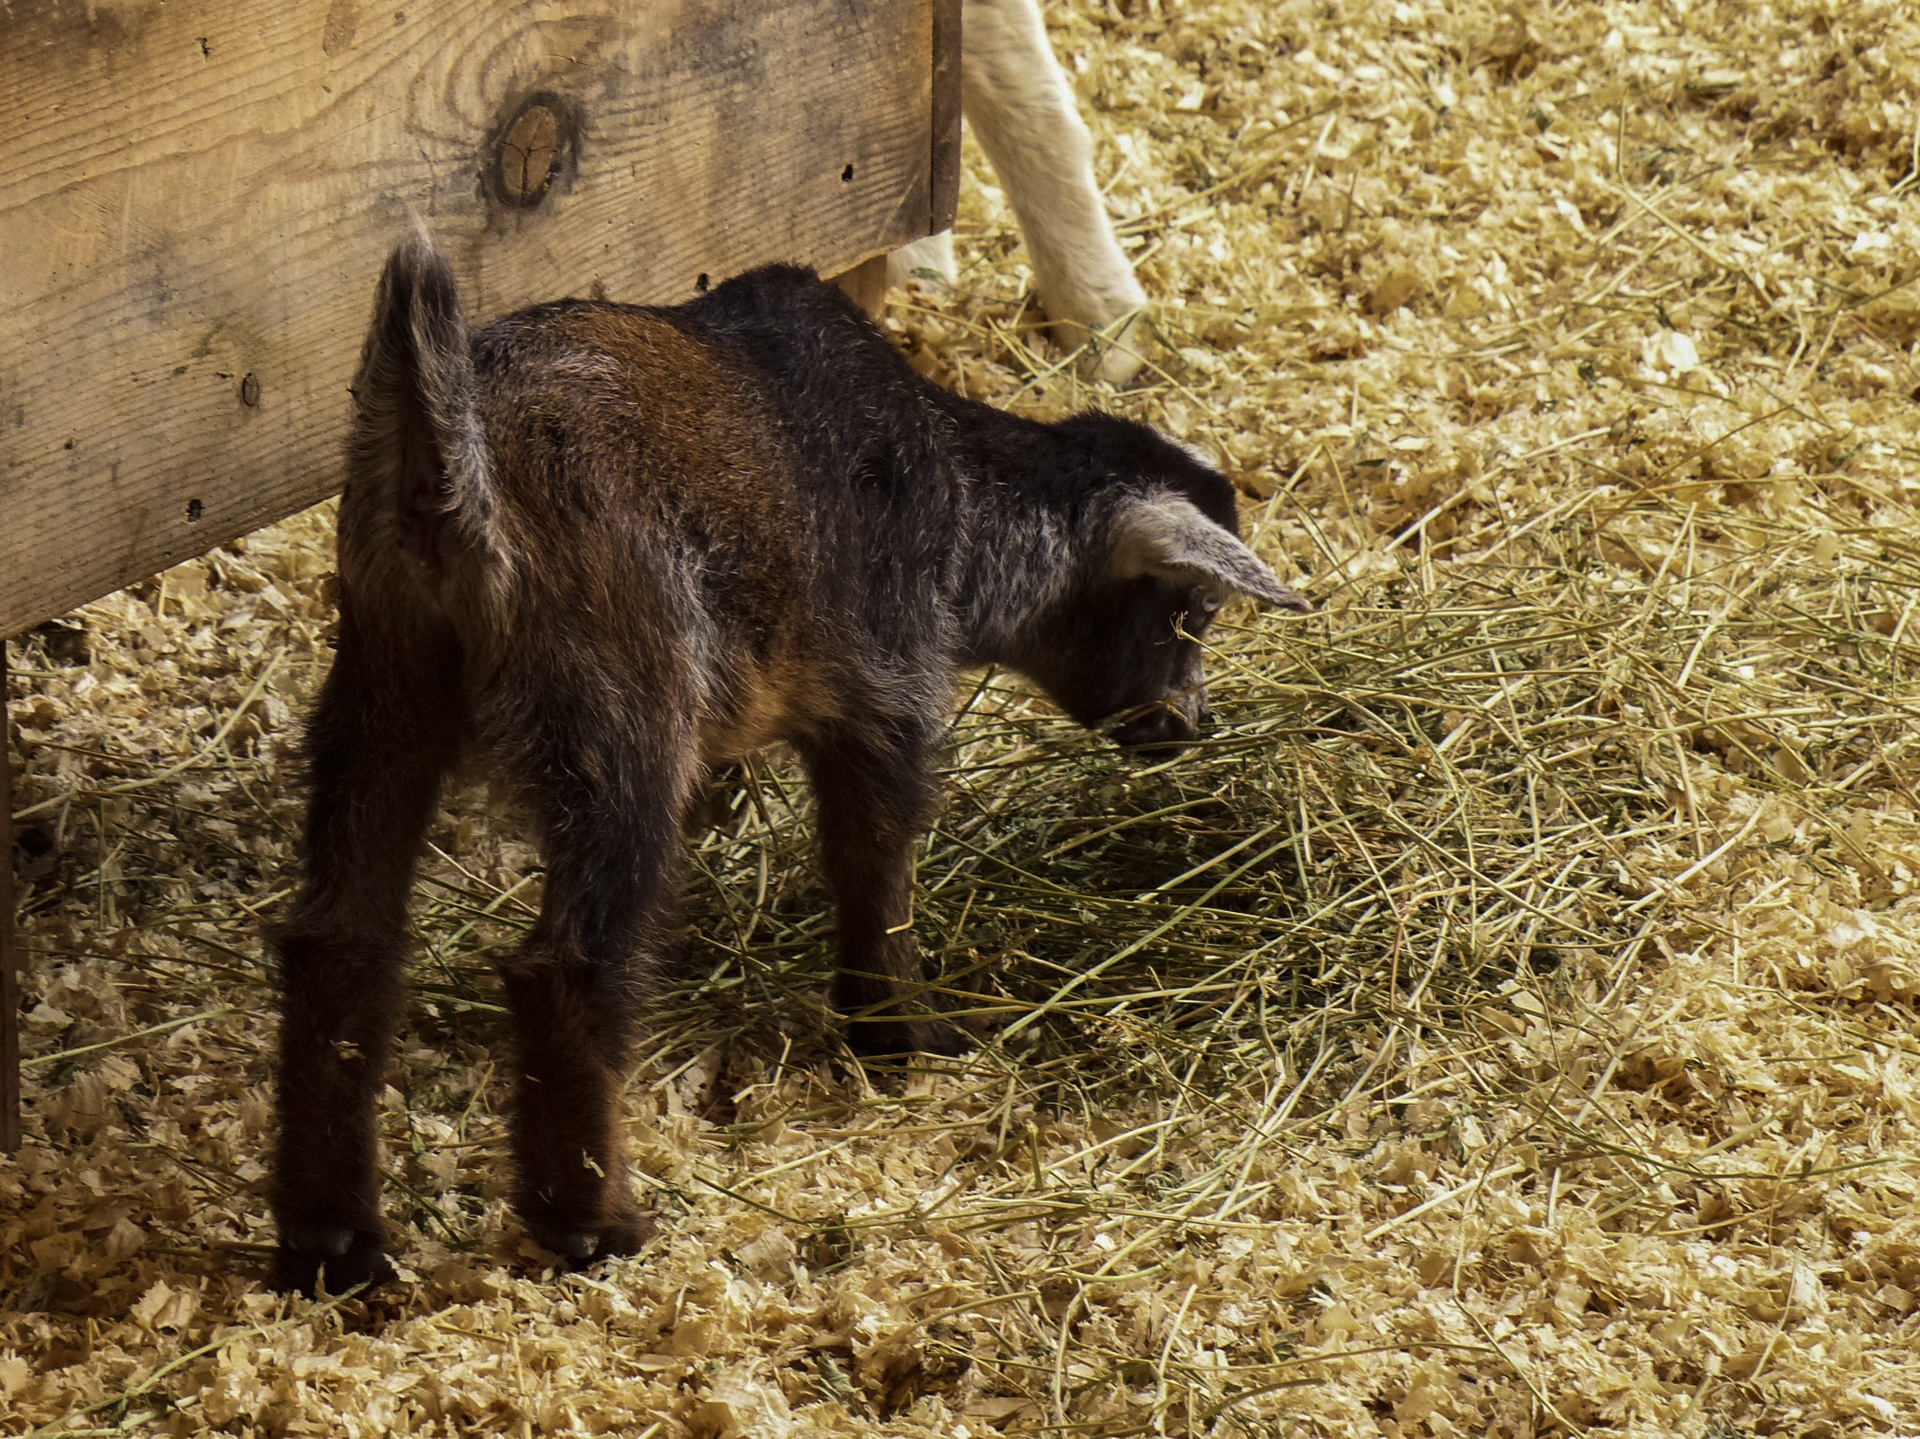 A small brown baby goat stands in golden hay near a wooden cart at the Los Angeles County Fair in Pomona